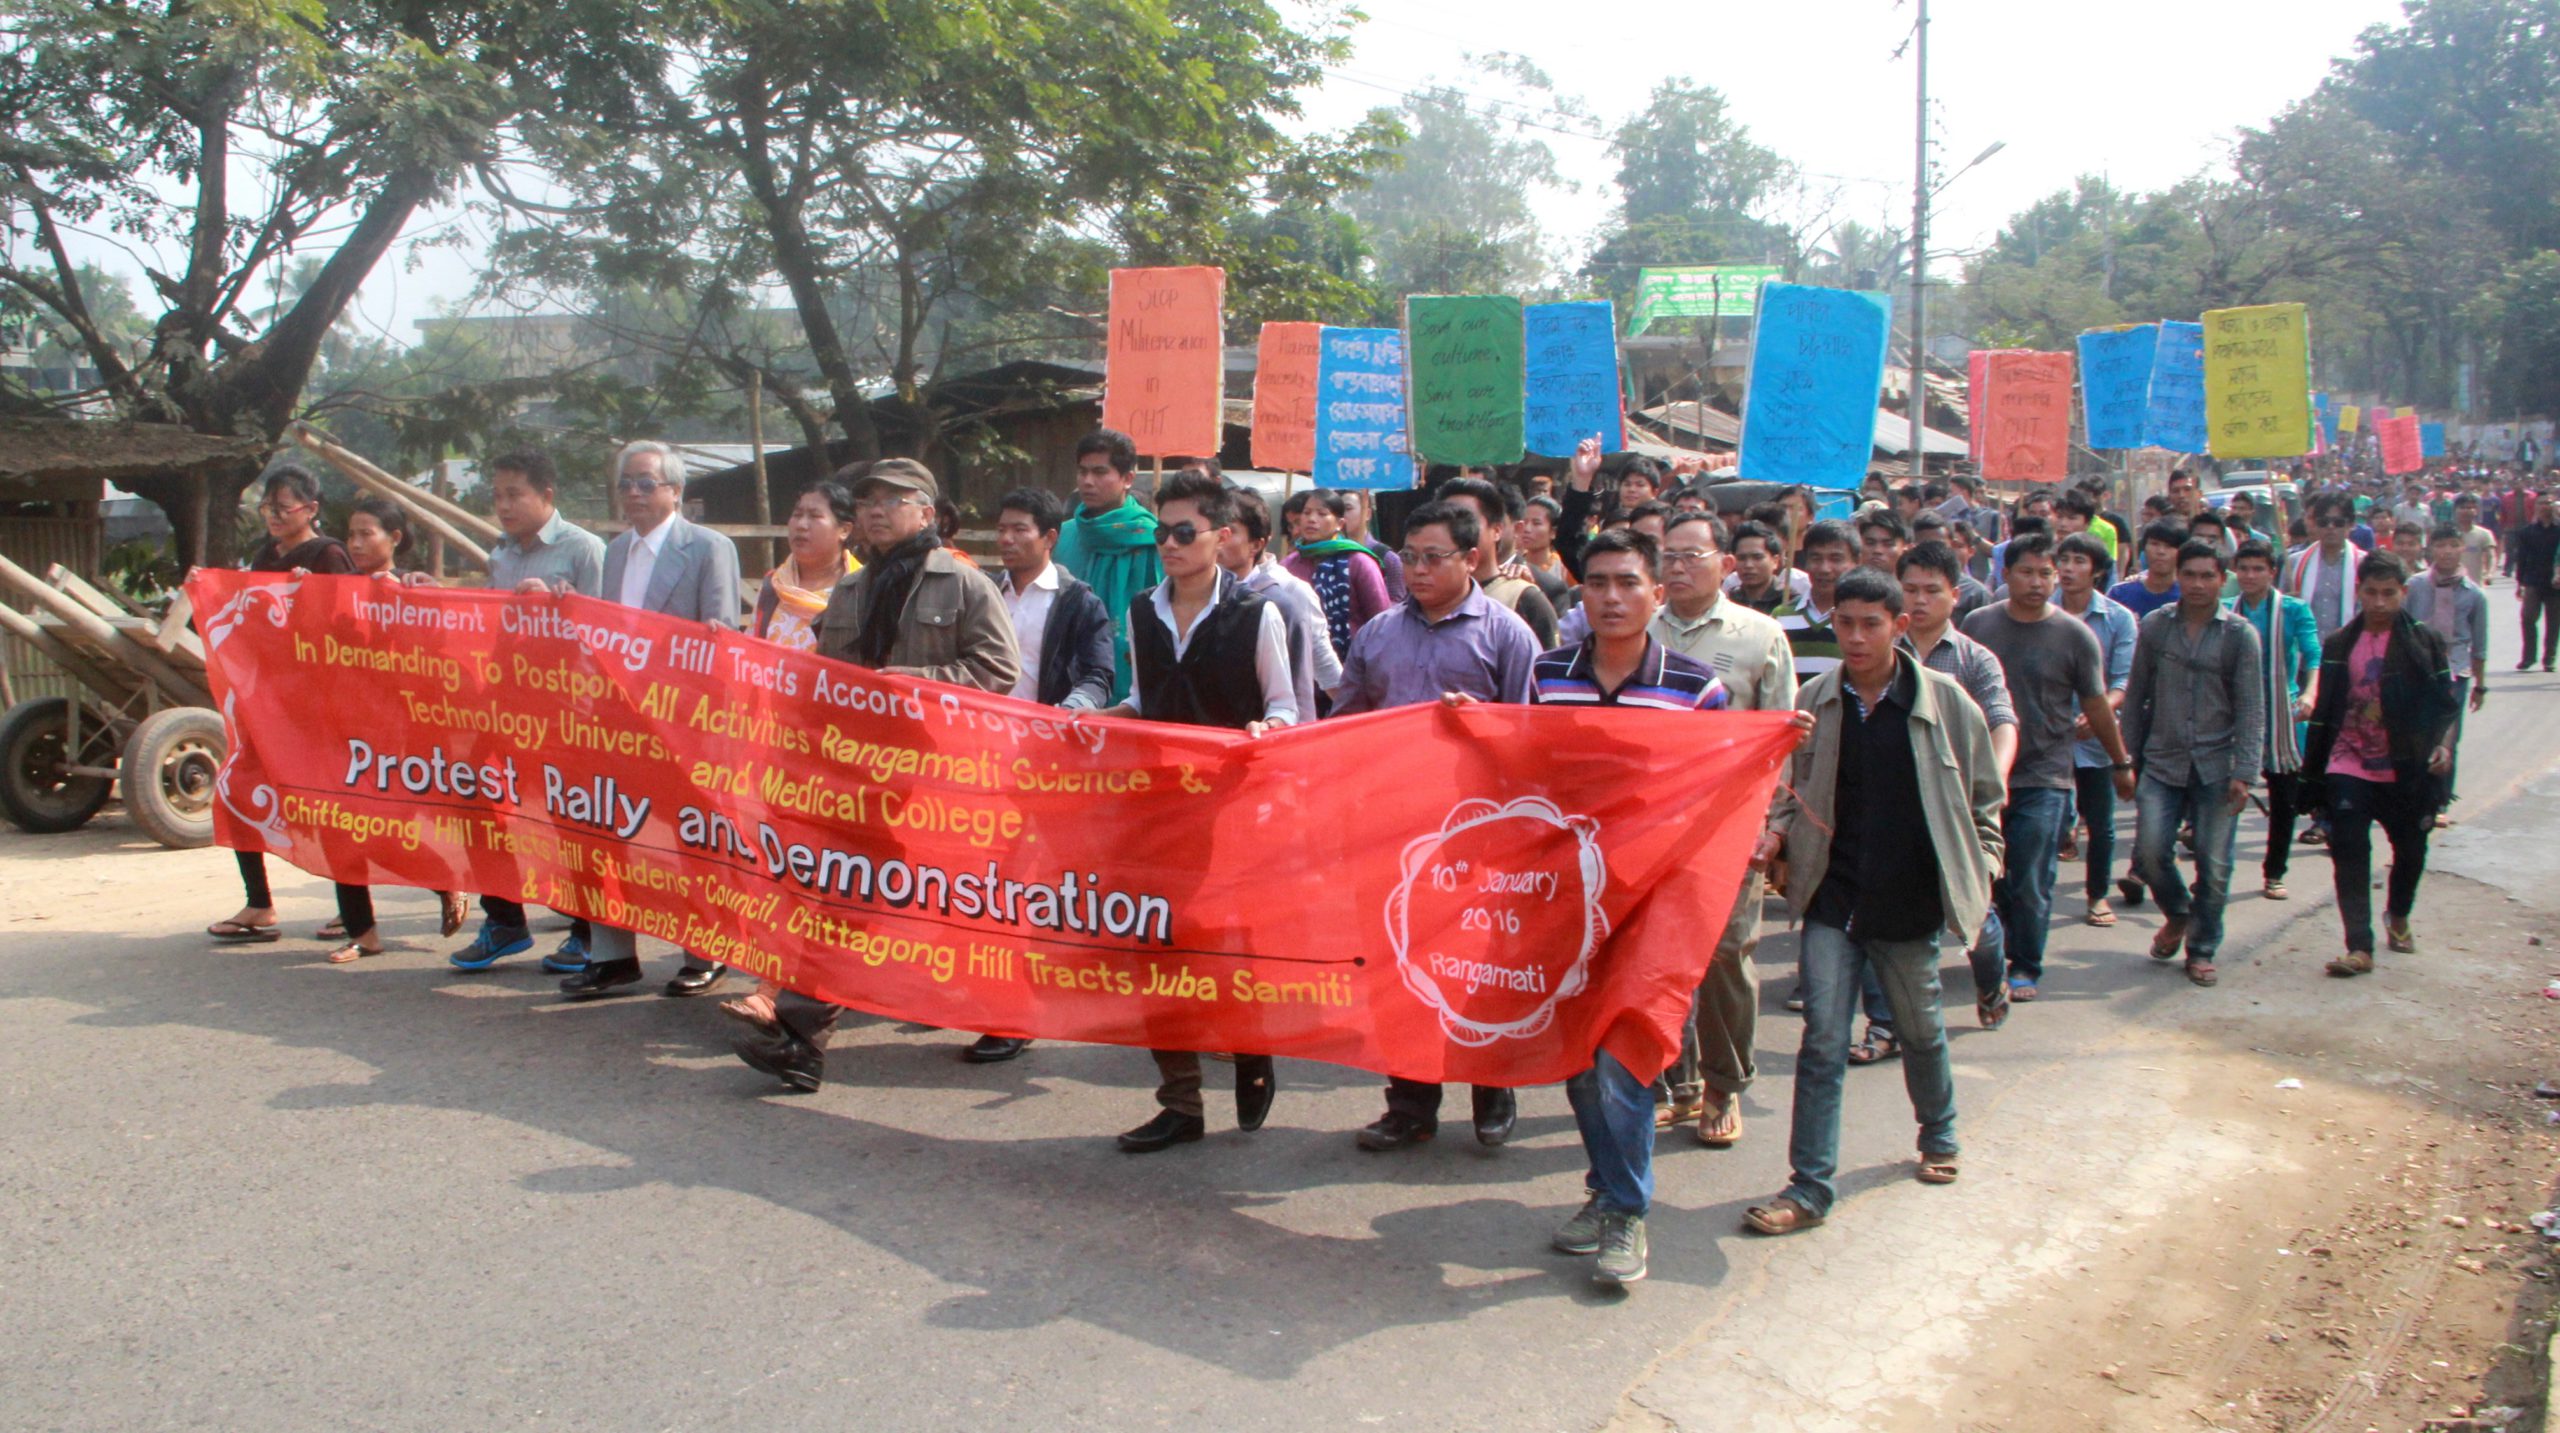 Protest Against University-Medical College